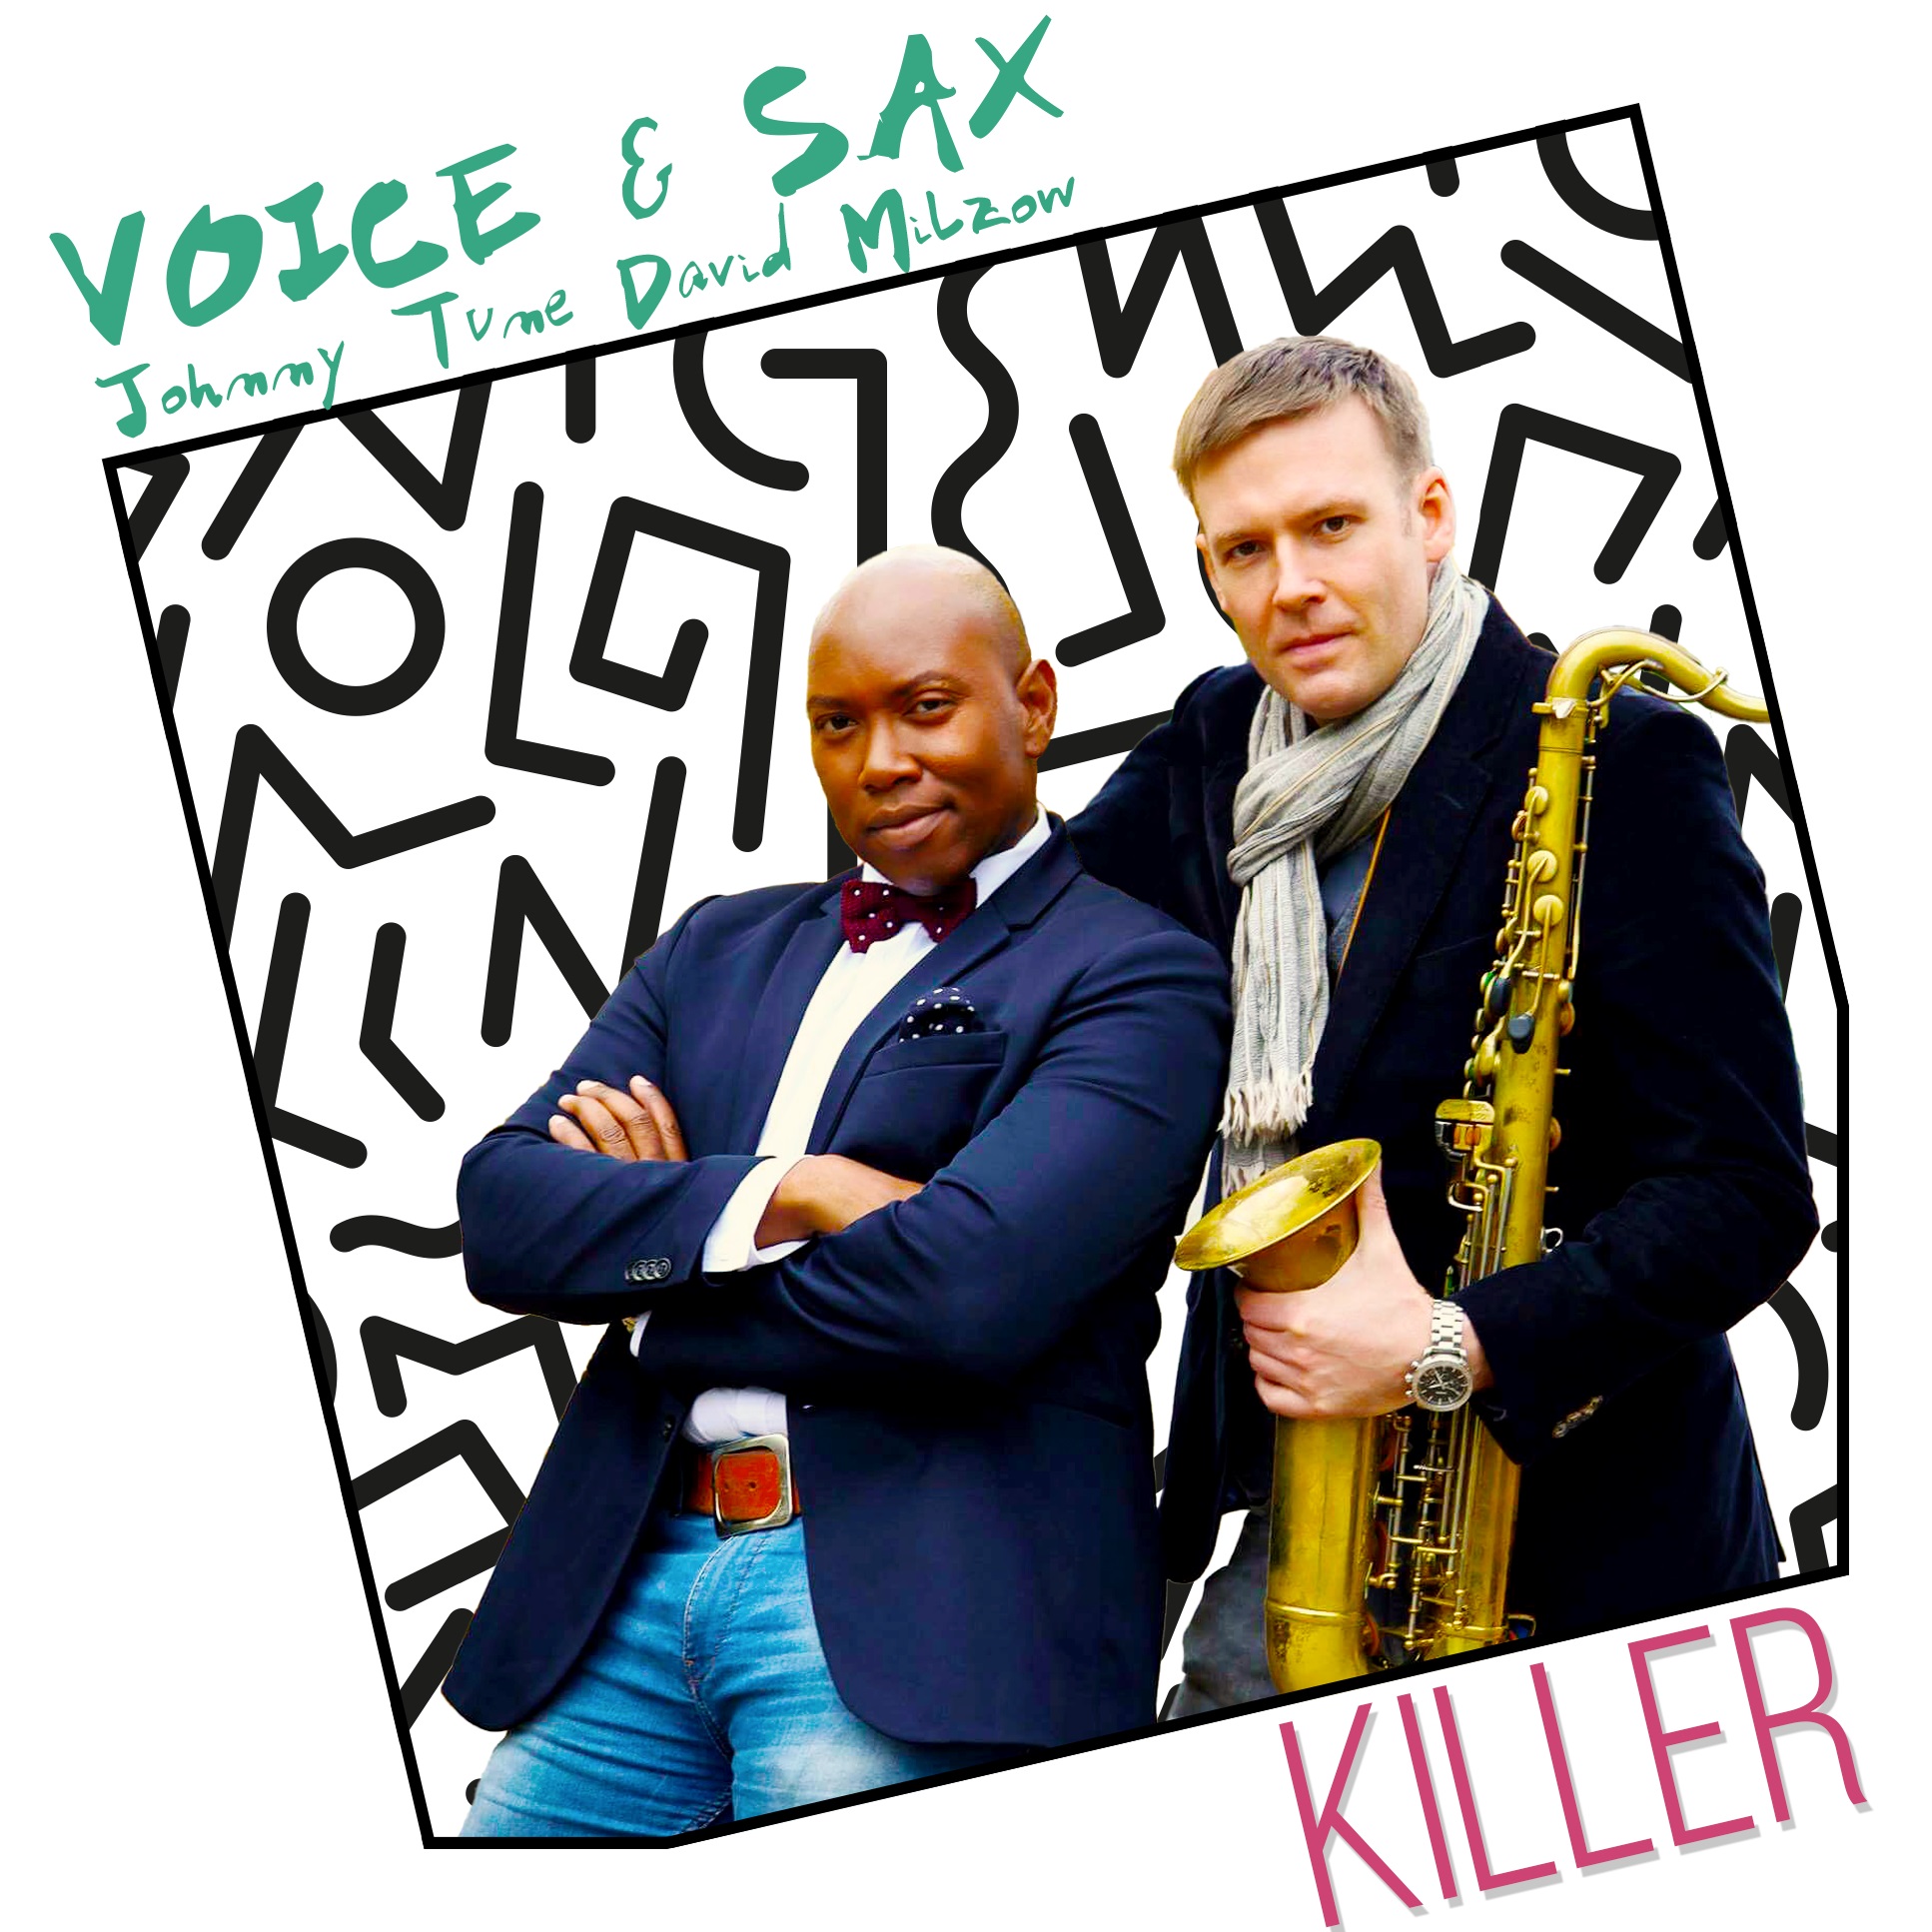 Voice and Sax, feat. Johnny Tune and David Milzow- EP-Release "Killer"